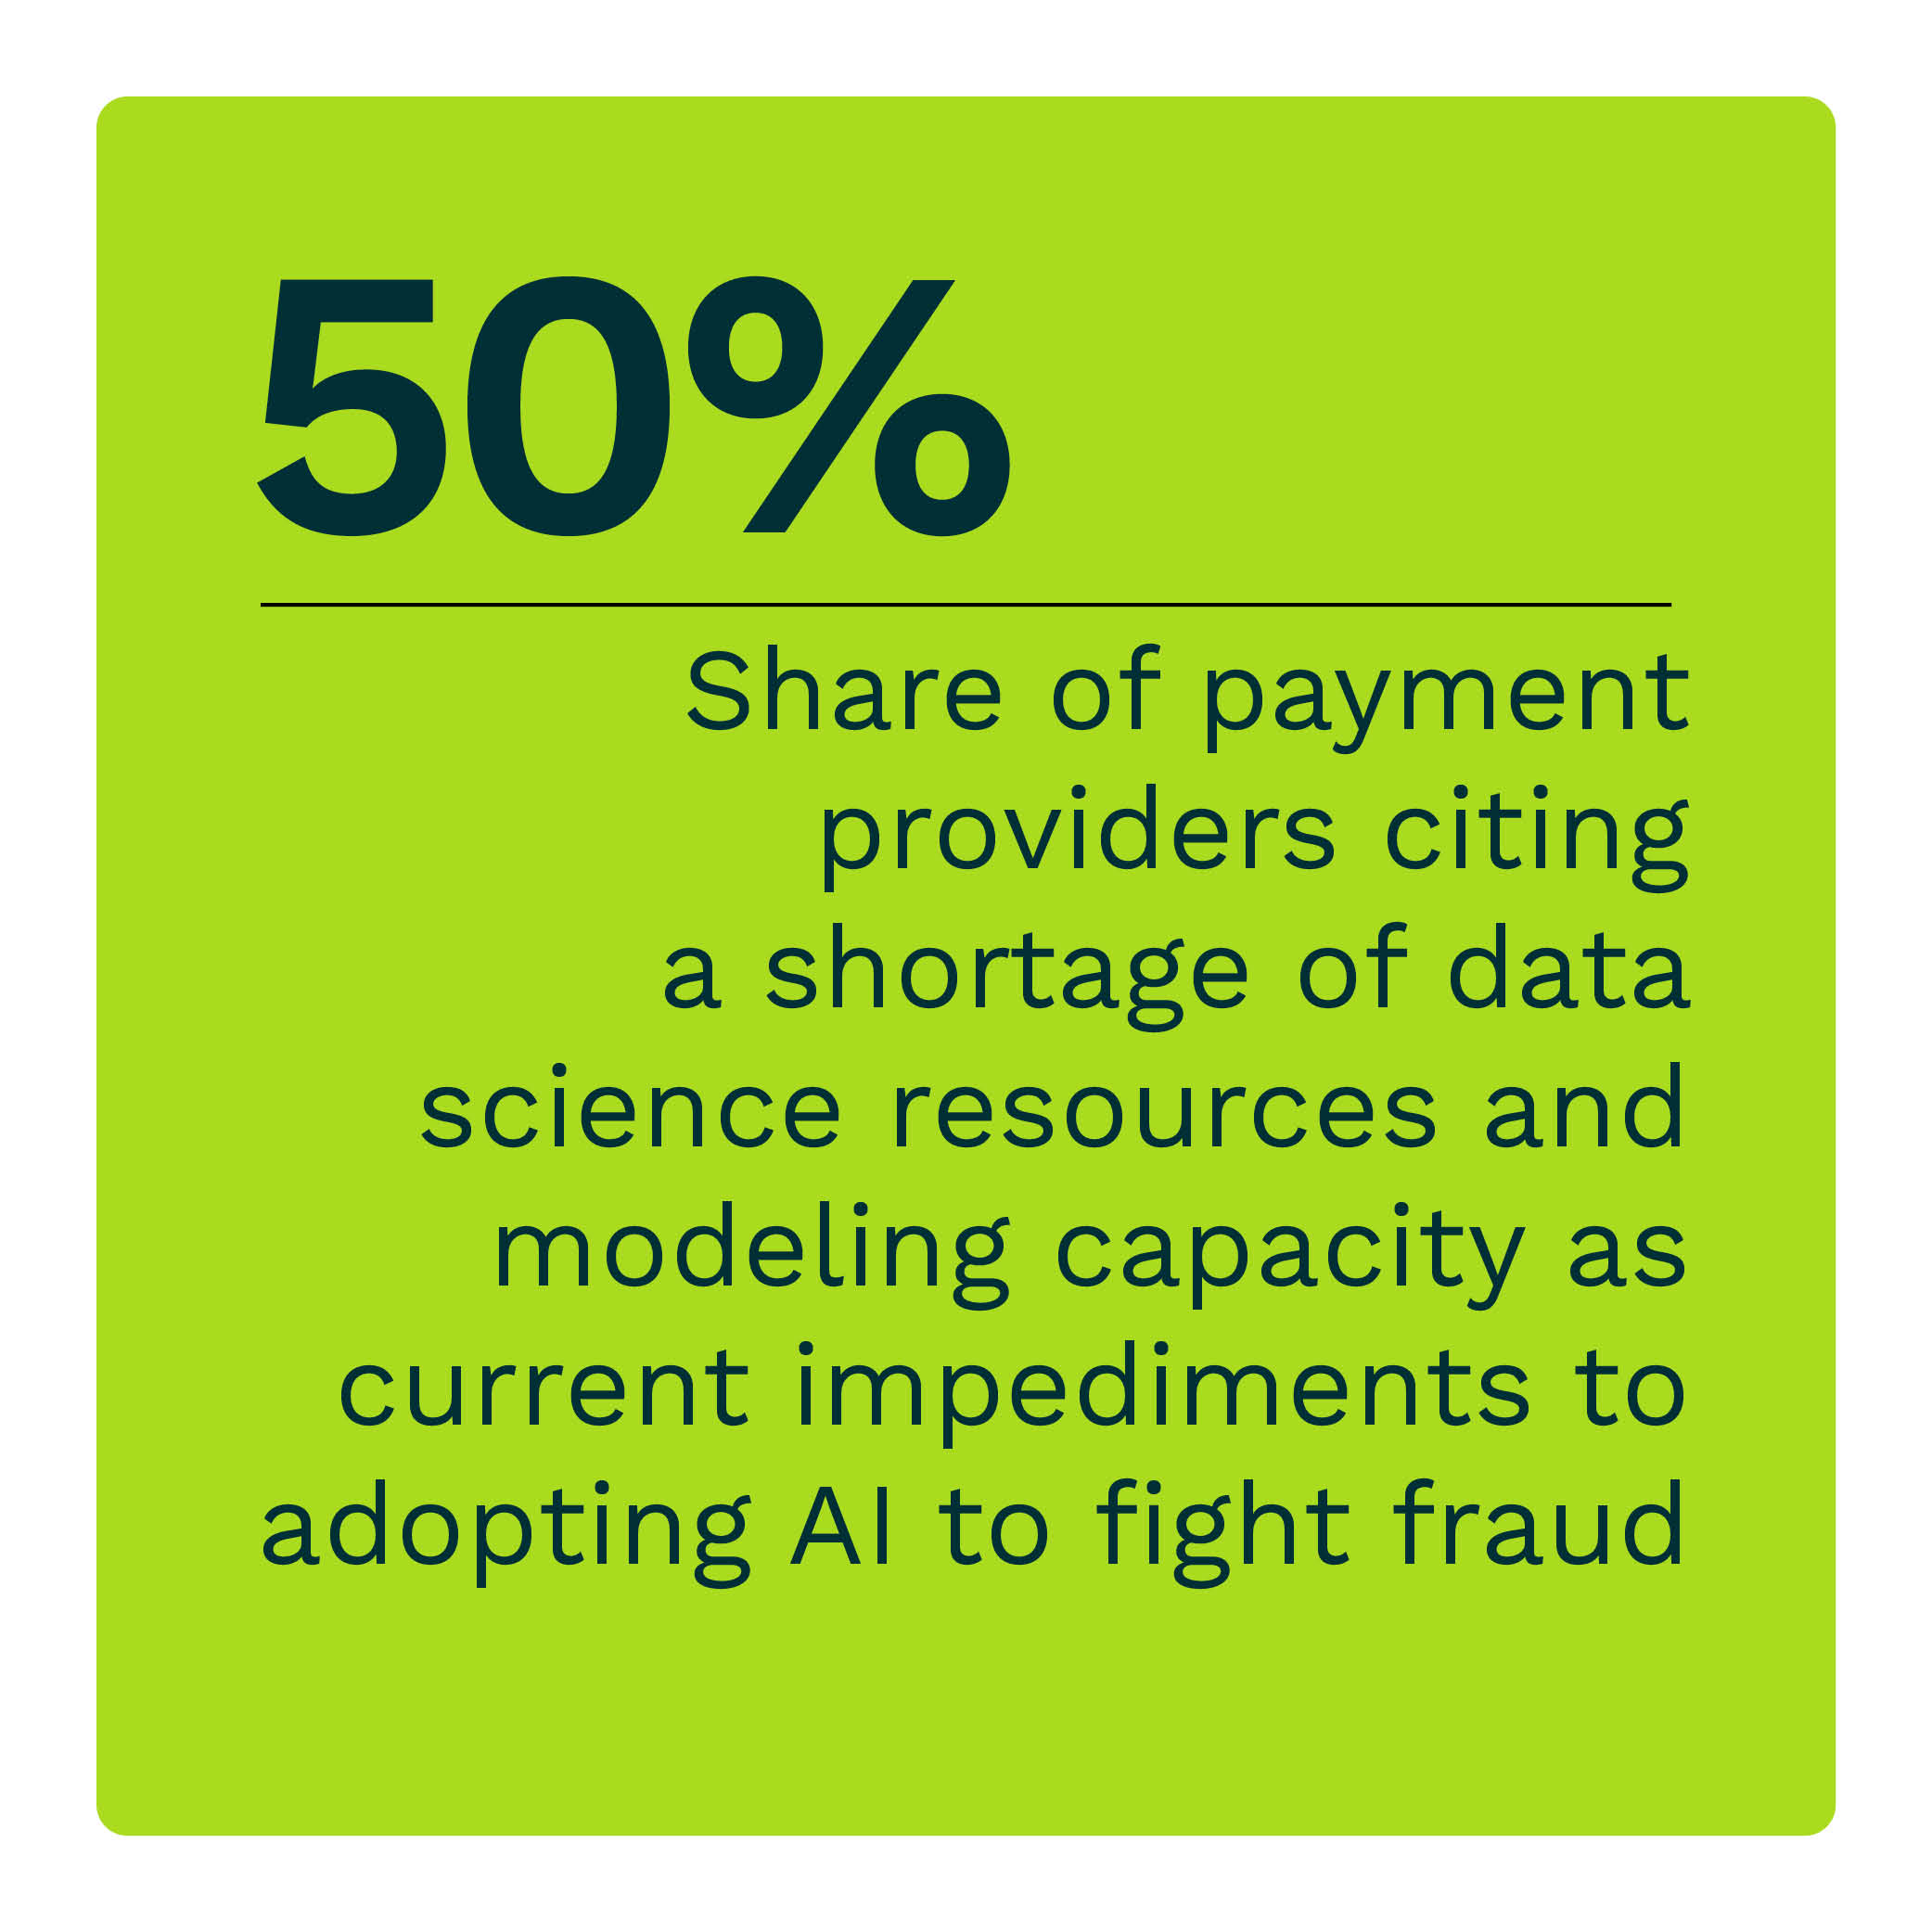 50%: Share of payment providers citing a shortage of data science resources and modeling capacity as current impediments to adopting AI to fight fraud